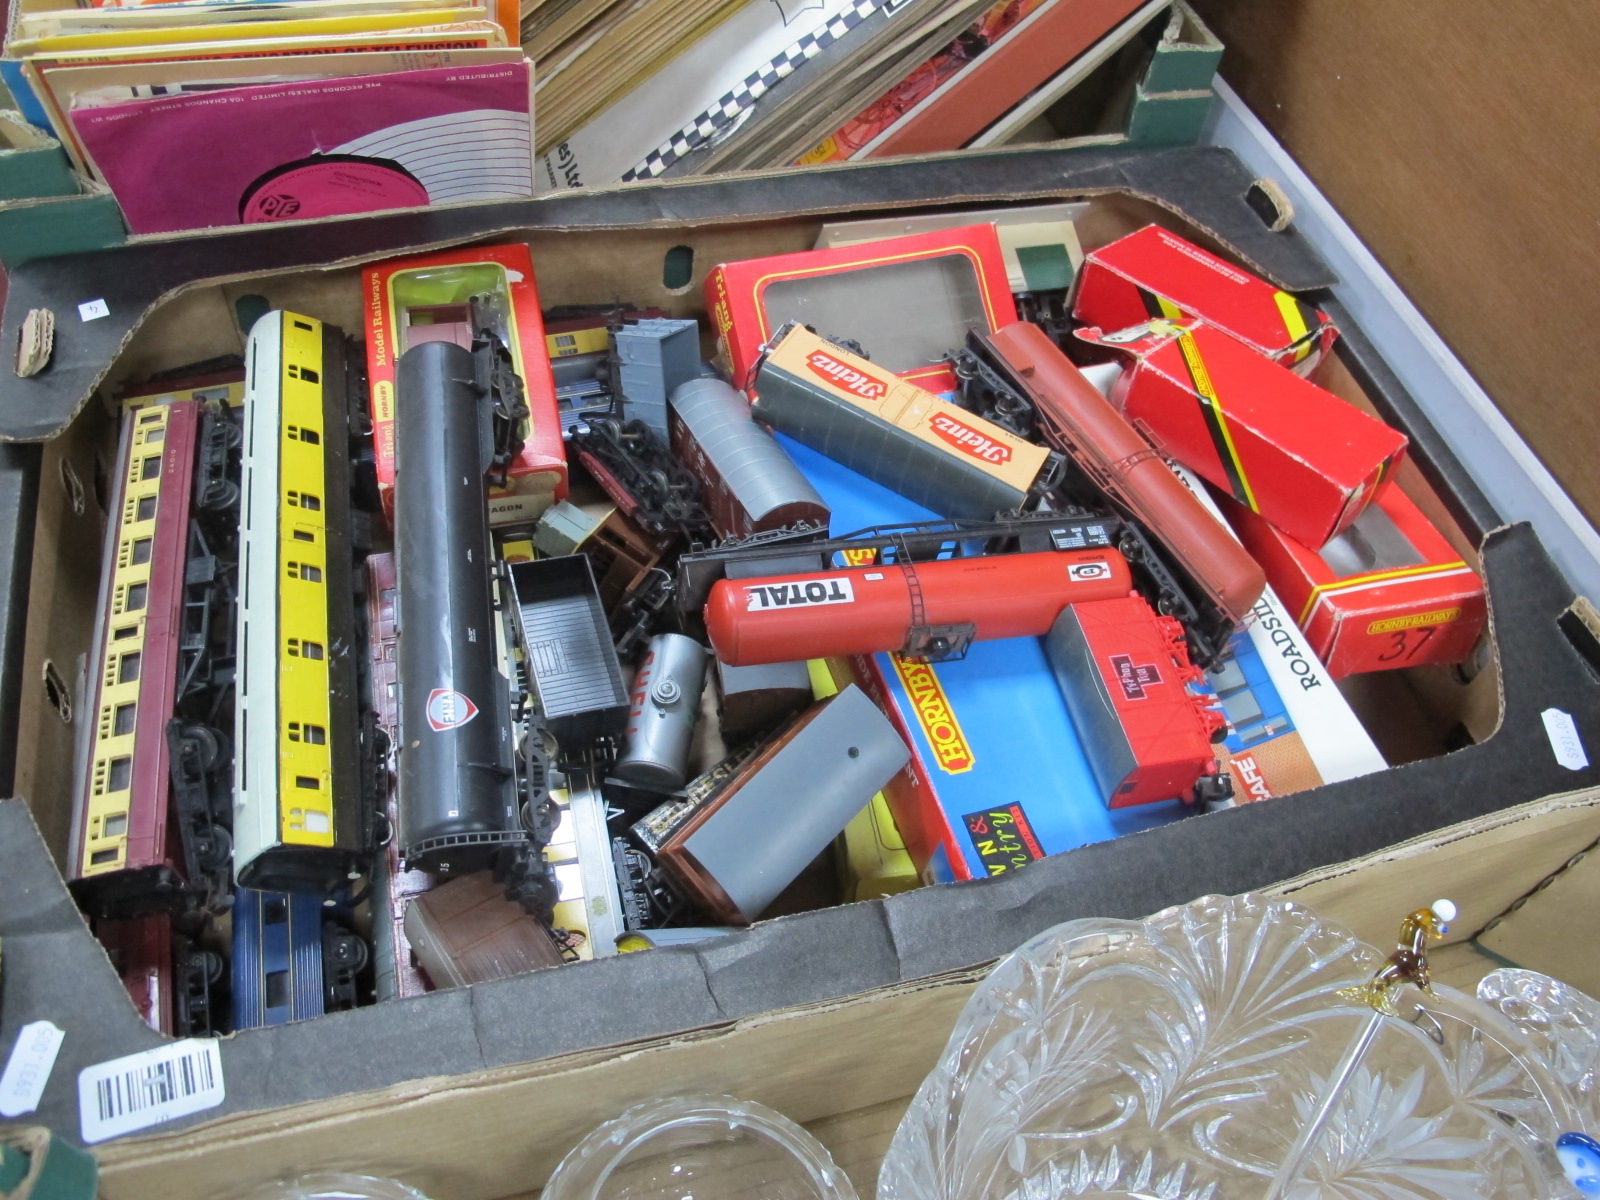 A Quantity of 'OO' Model Railway Rolling Stock, by Hornby and others.